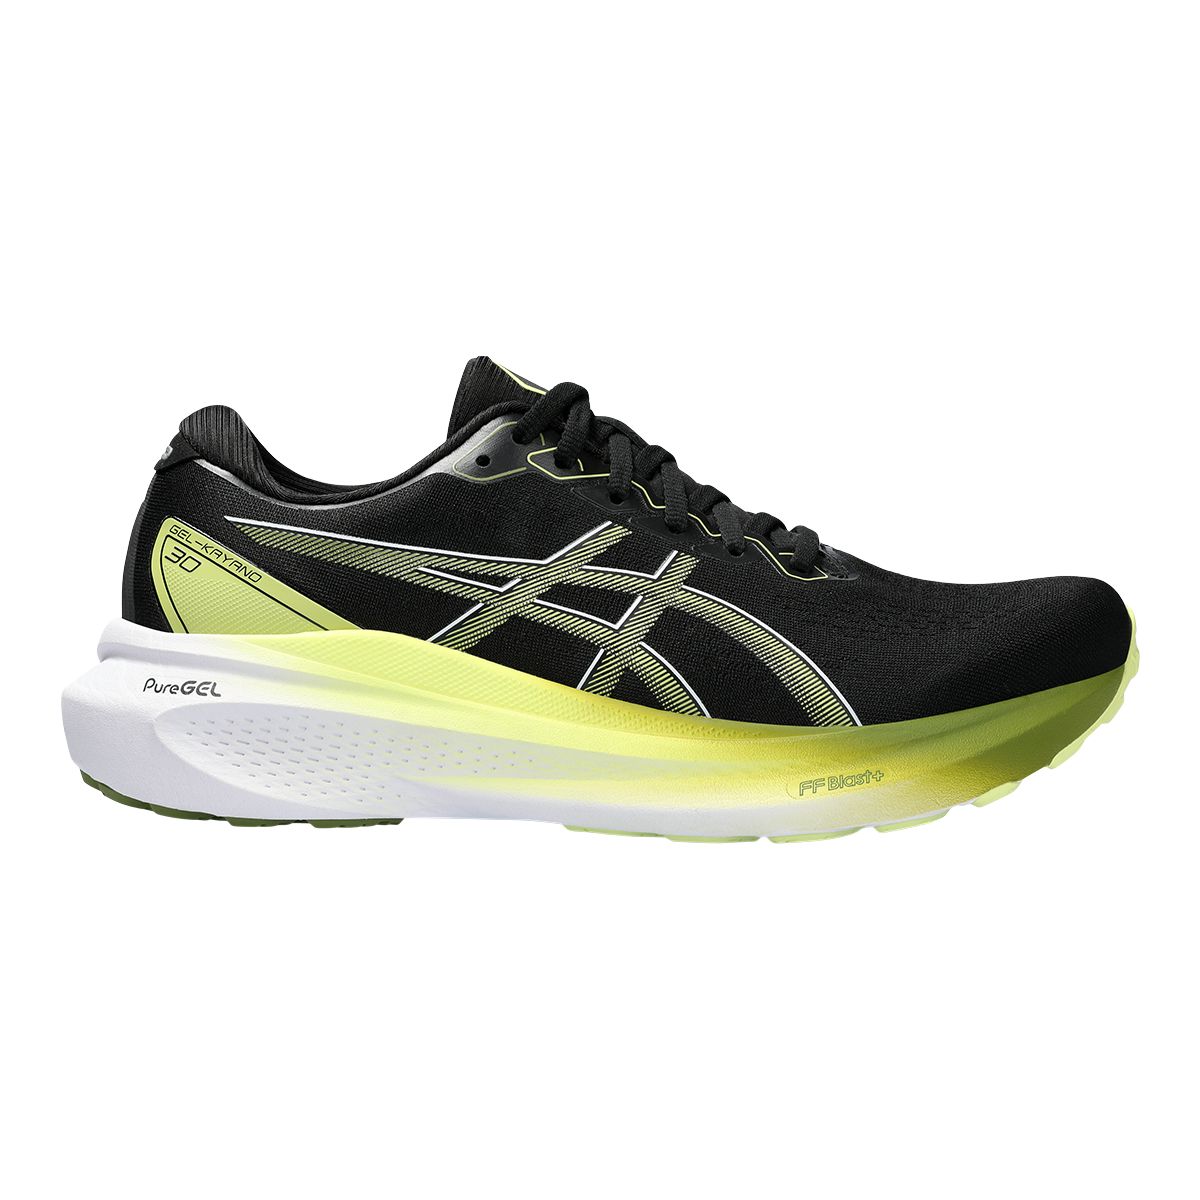 Image of Asics Men's Gel Kayano 3 Breathable Knit Running Shoes